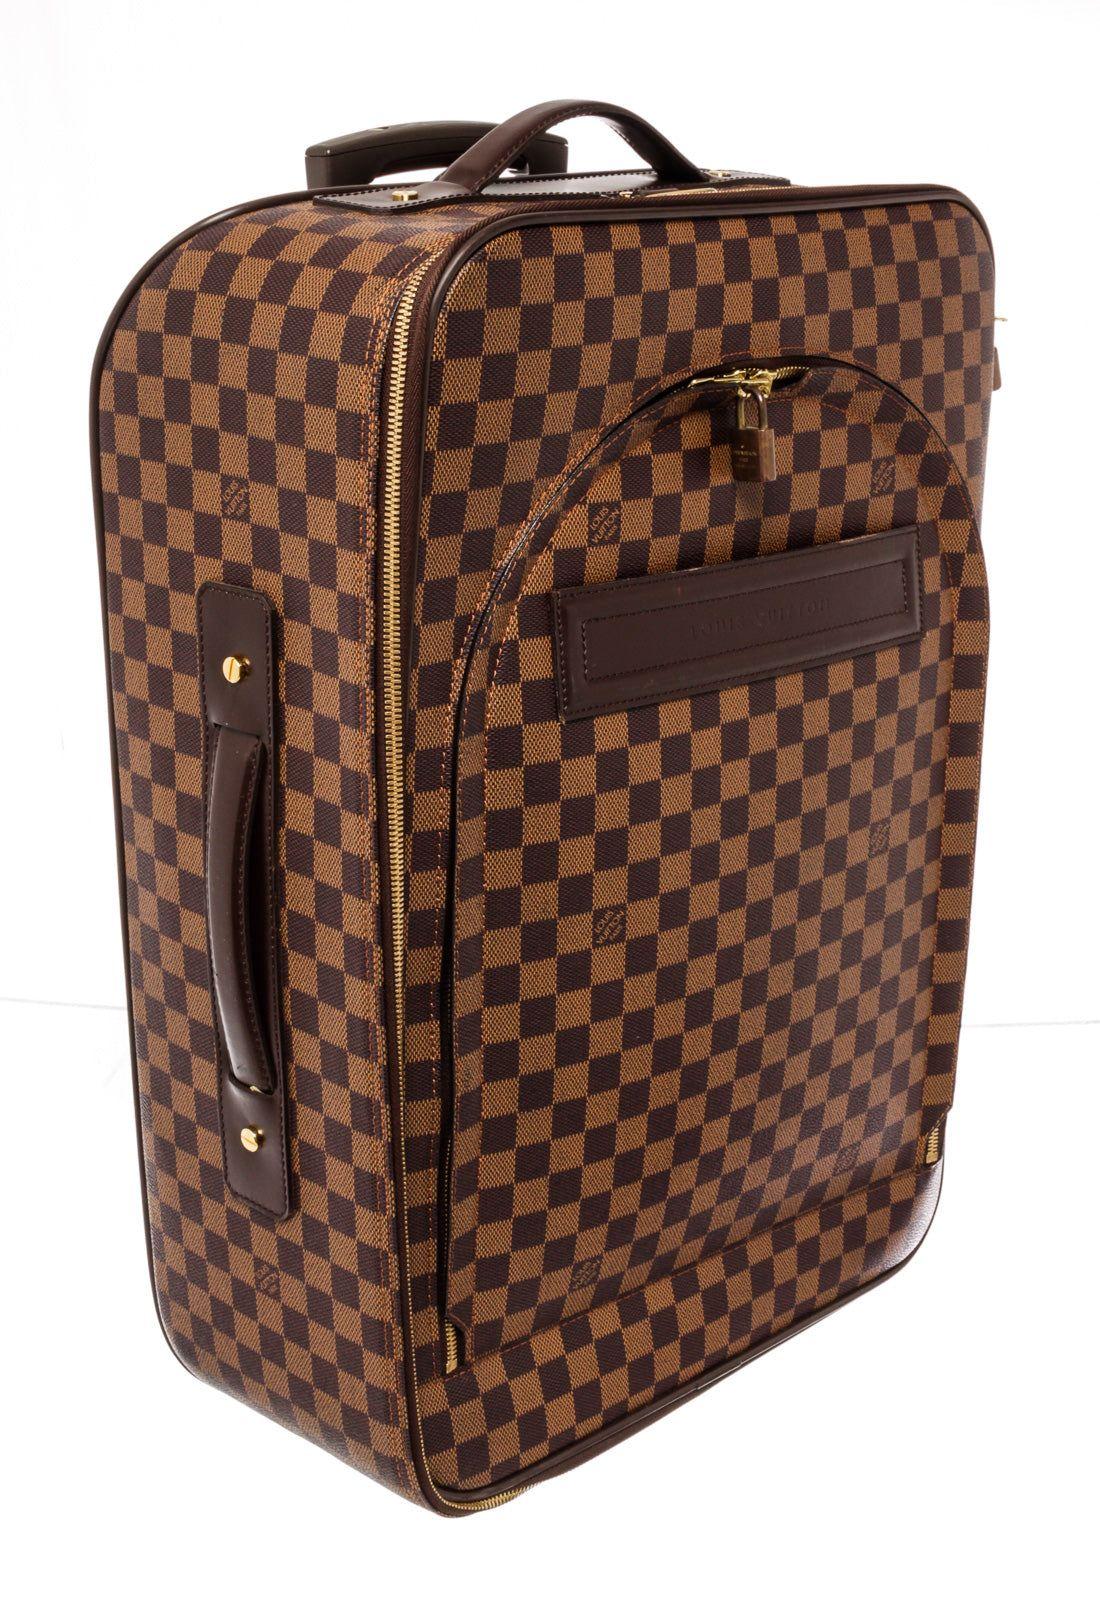 Brown Damier Ebene coated canvas Louis Vuitton Pegase 55 with Macassar leather trimmings, gold-tone hardware, retractable pull handle, zip pocket at front, dual wheels at base, two internal zip pockets with Velcro security strap, and two-way zip